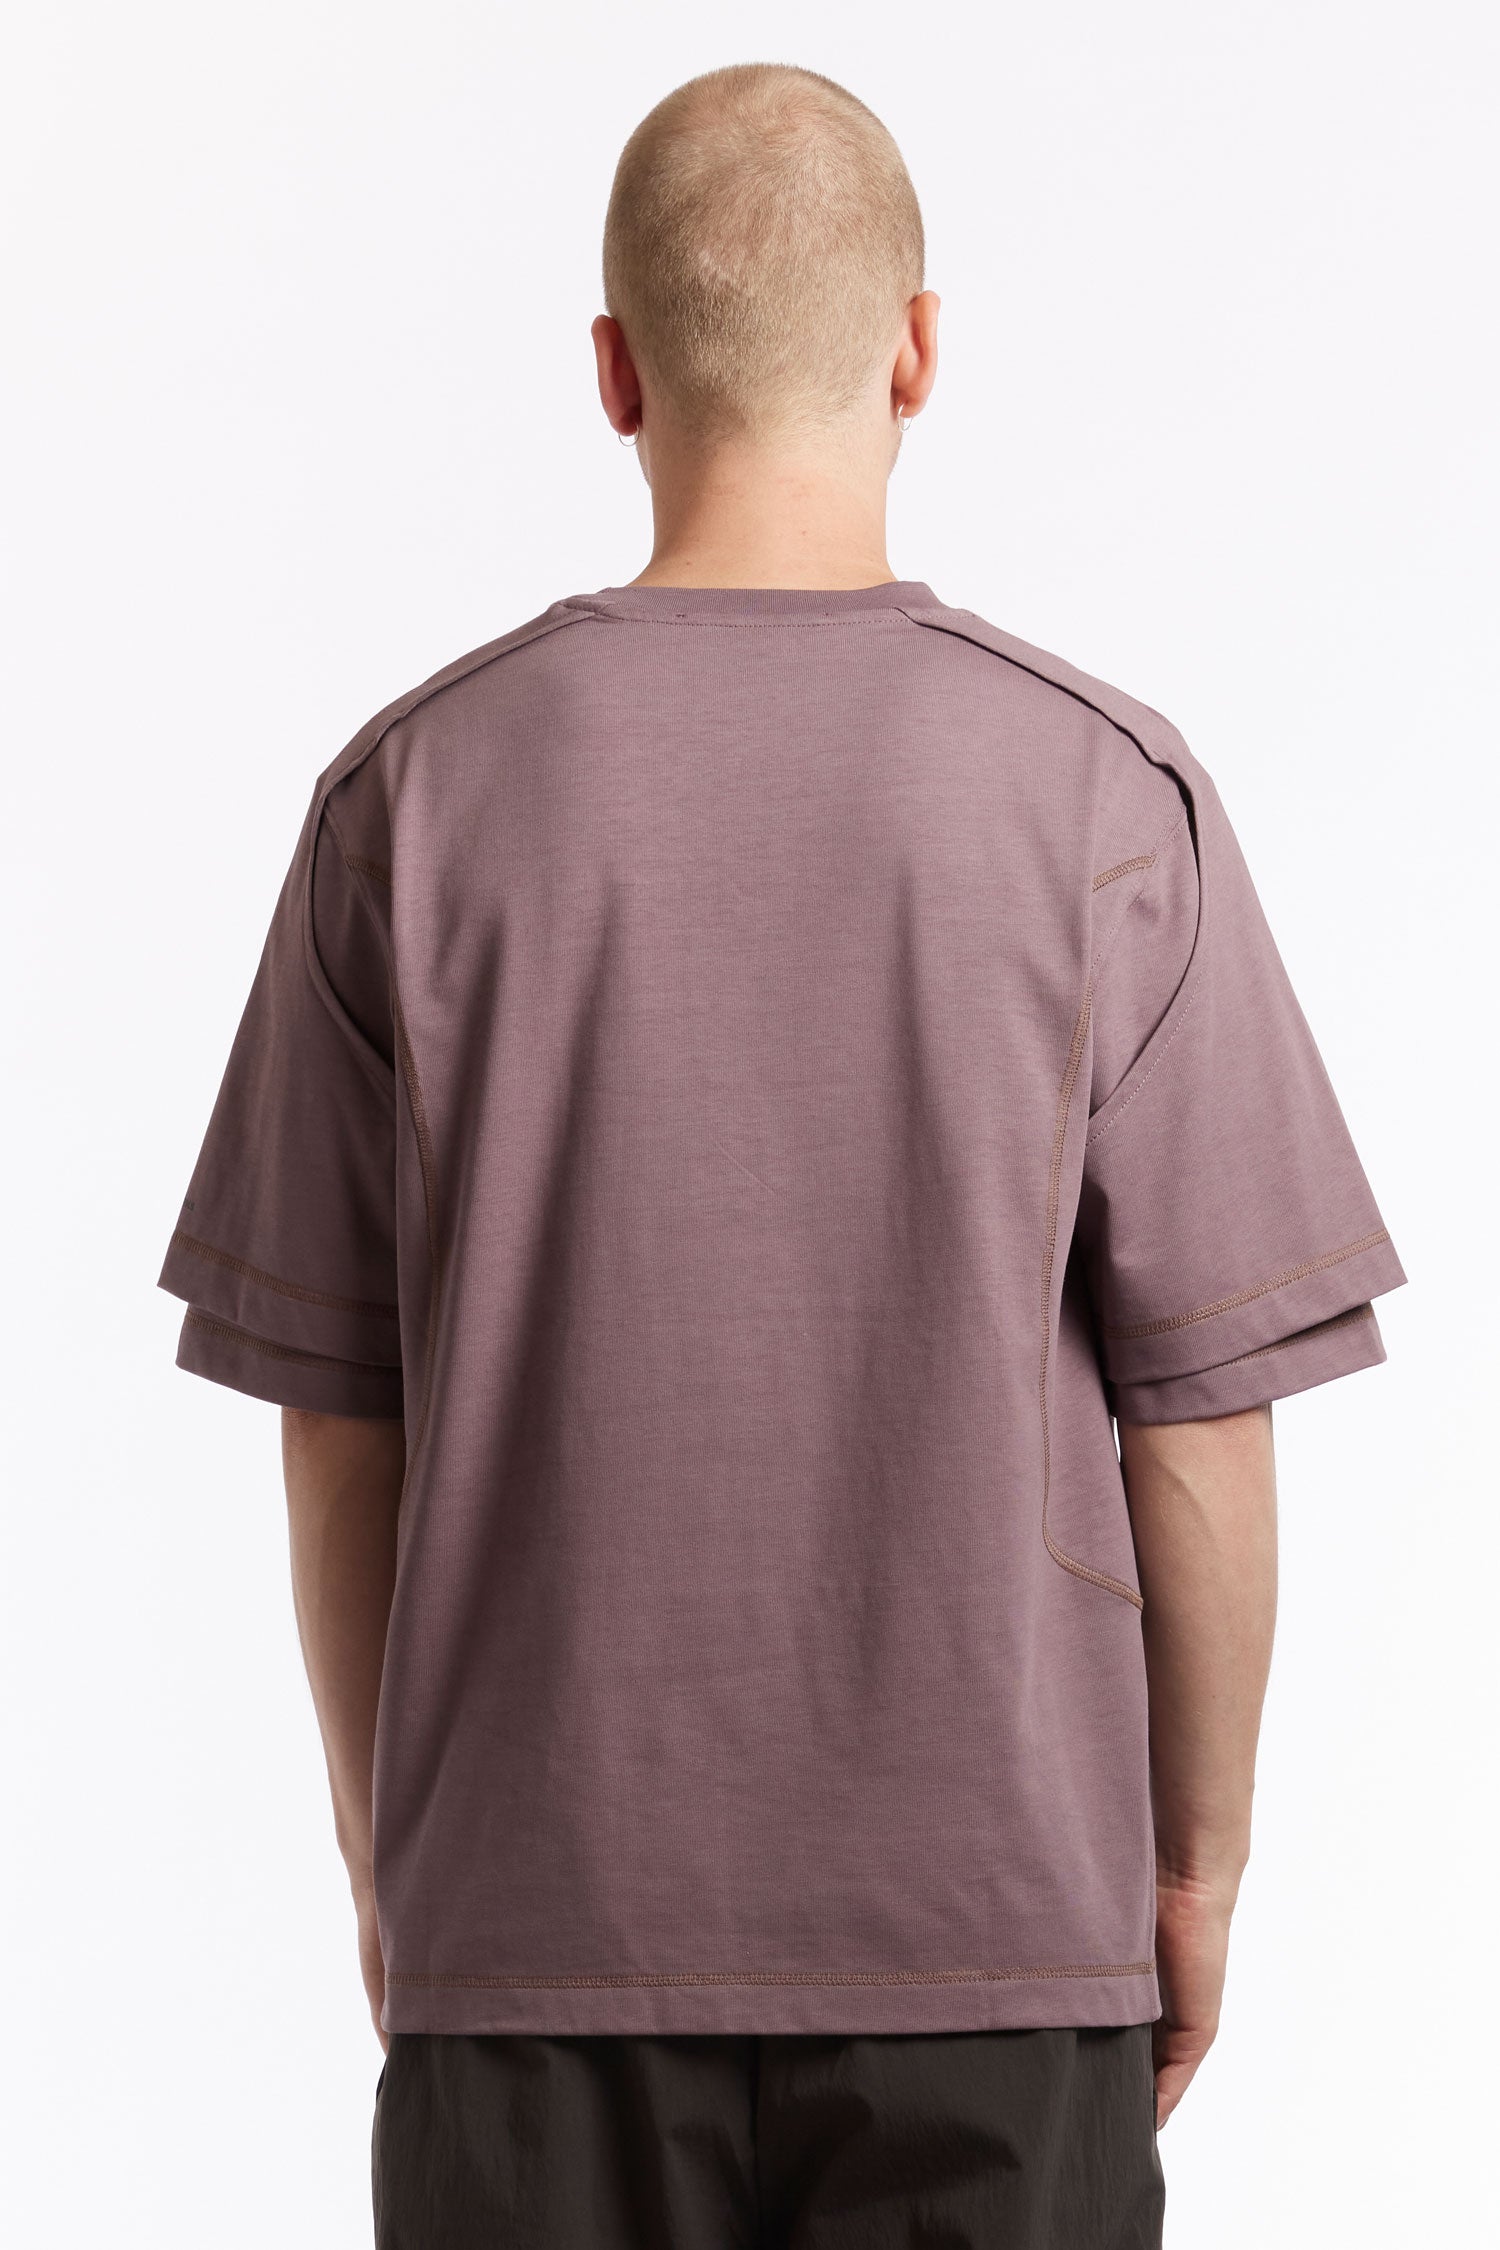 The AFFXWRKS - DUAL SLEEVE SS TEE  available online with global shipping, and in PAM Stores Melbourne and Sydney.